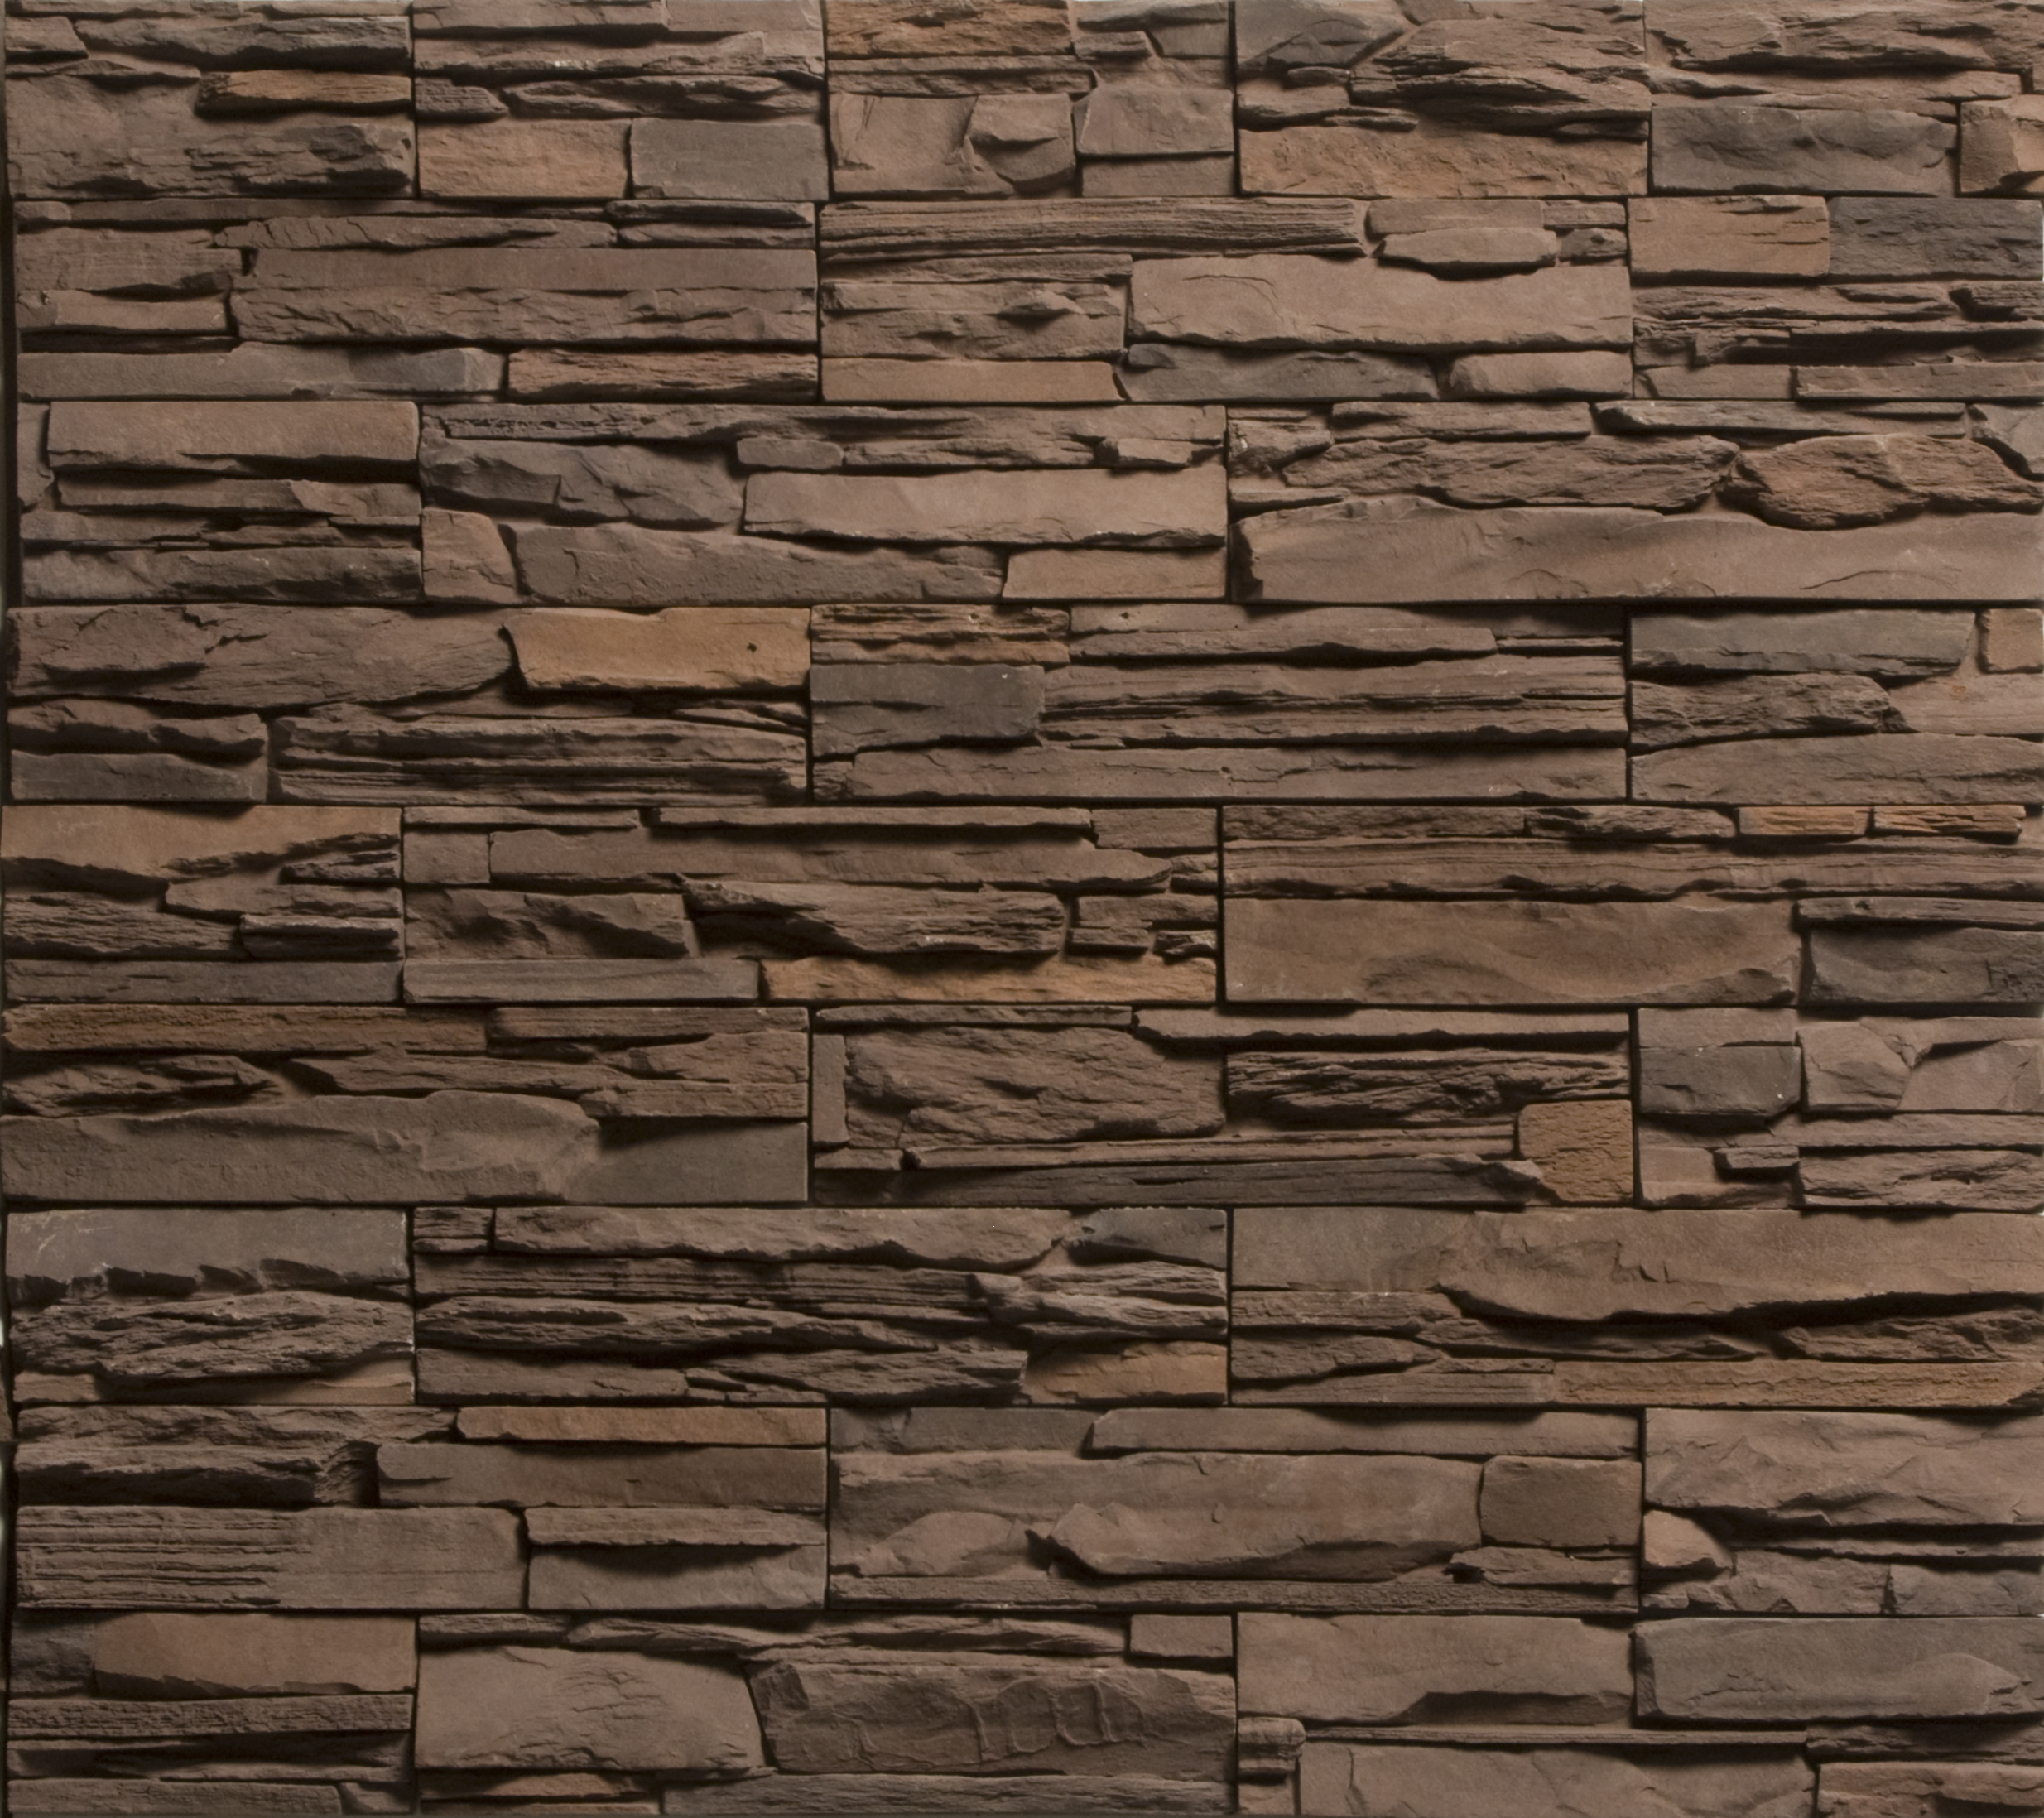  stone, wall, texture stone, stone wall, download background, brown stone background